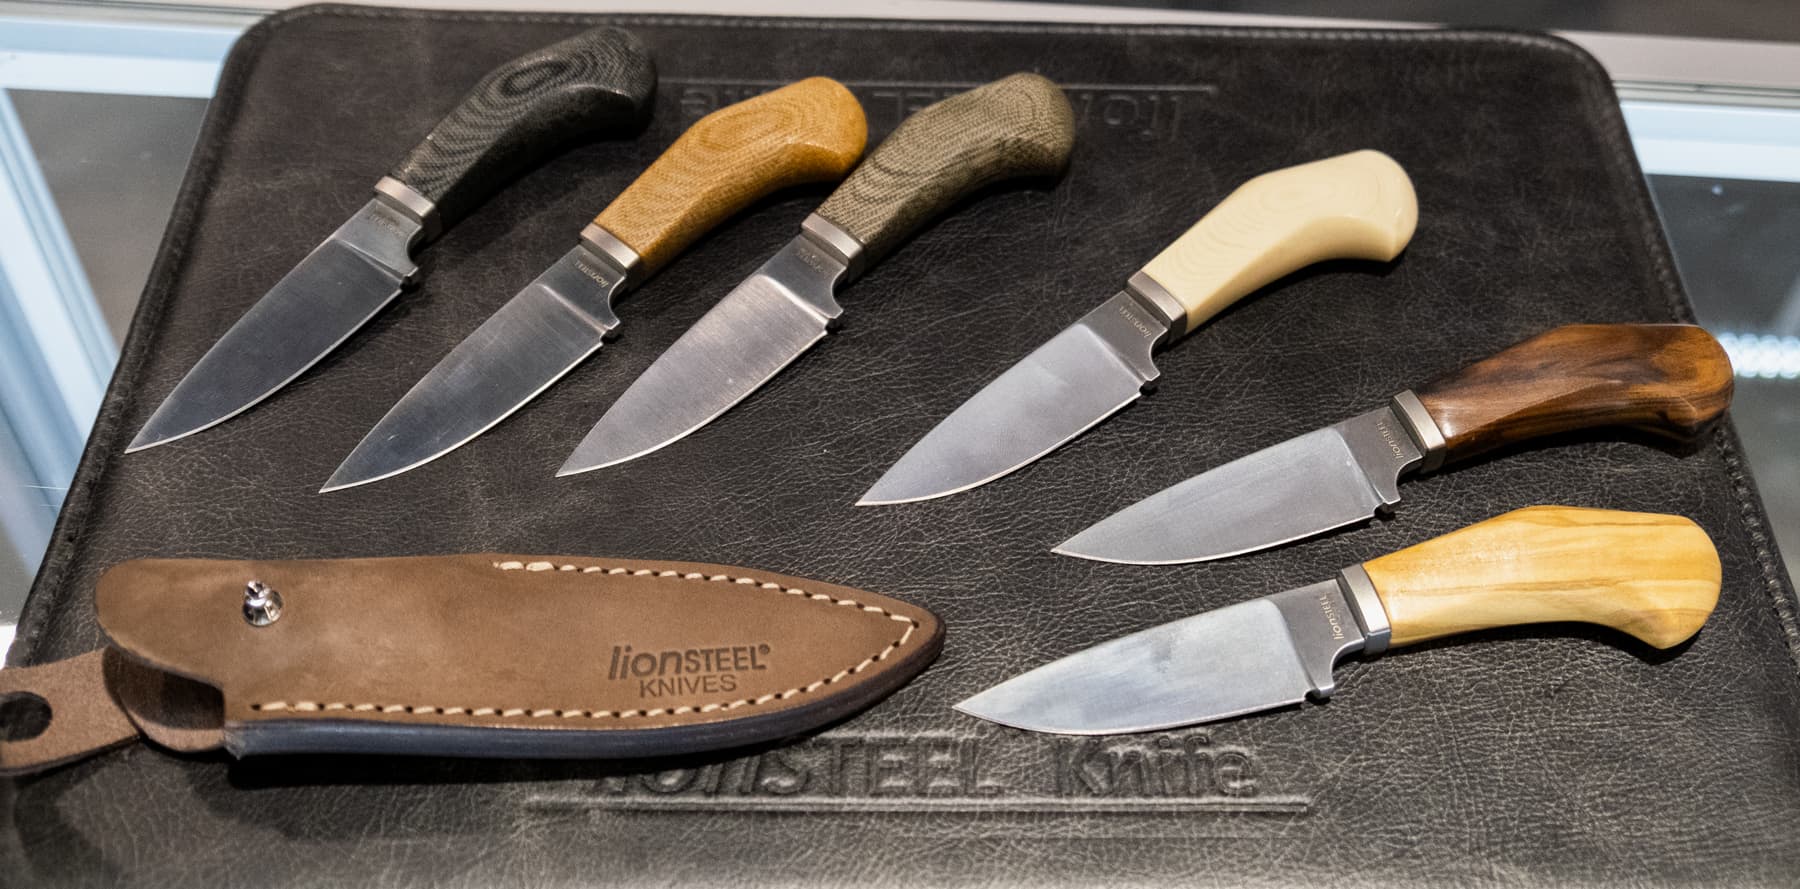 The LionSteel Willy has a 2.5” blade with a full flat grind in Bohler M390 steel.